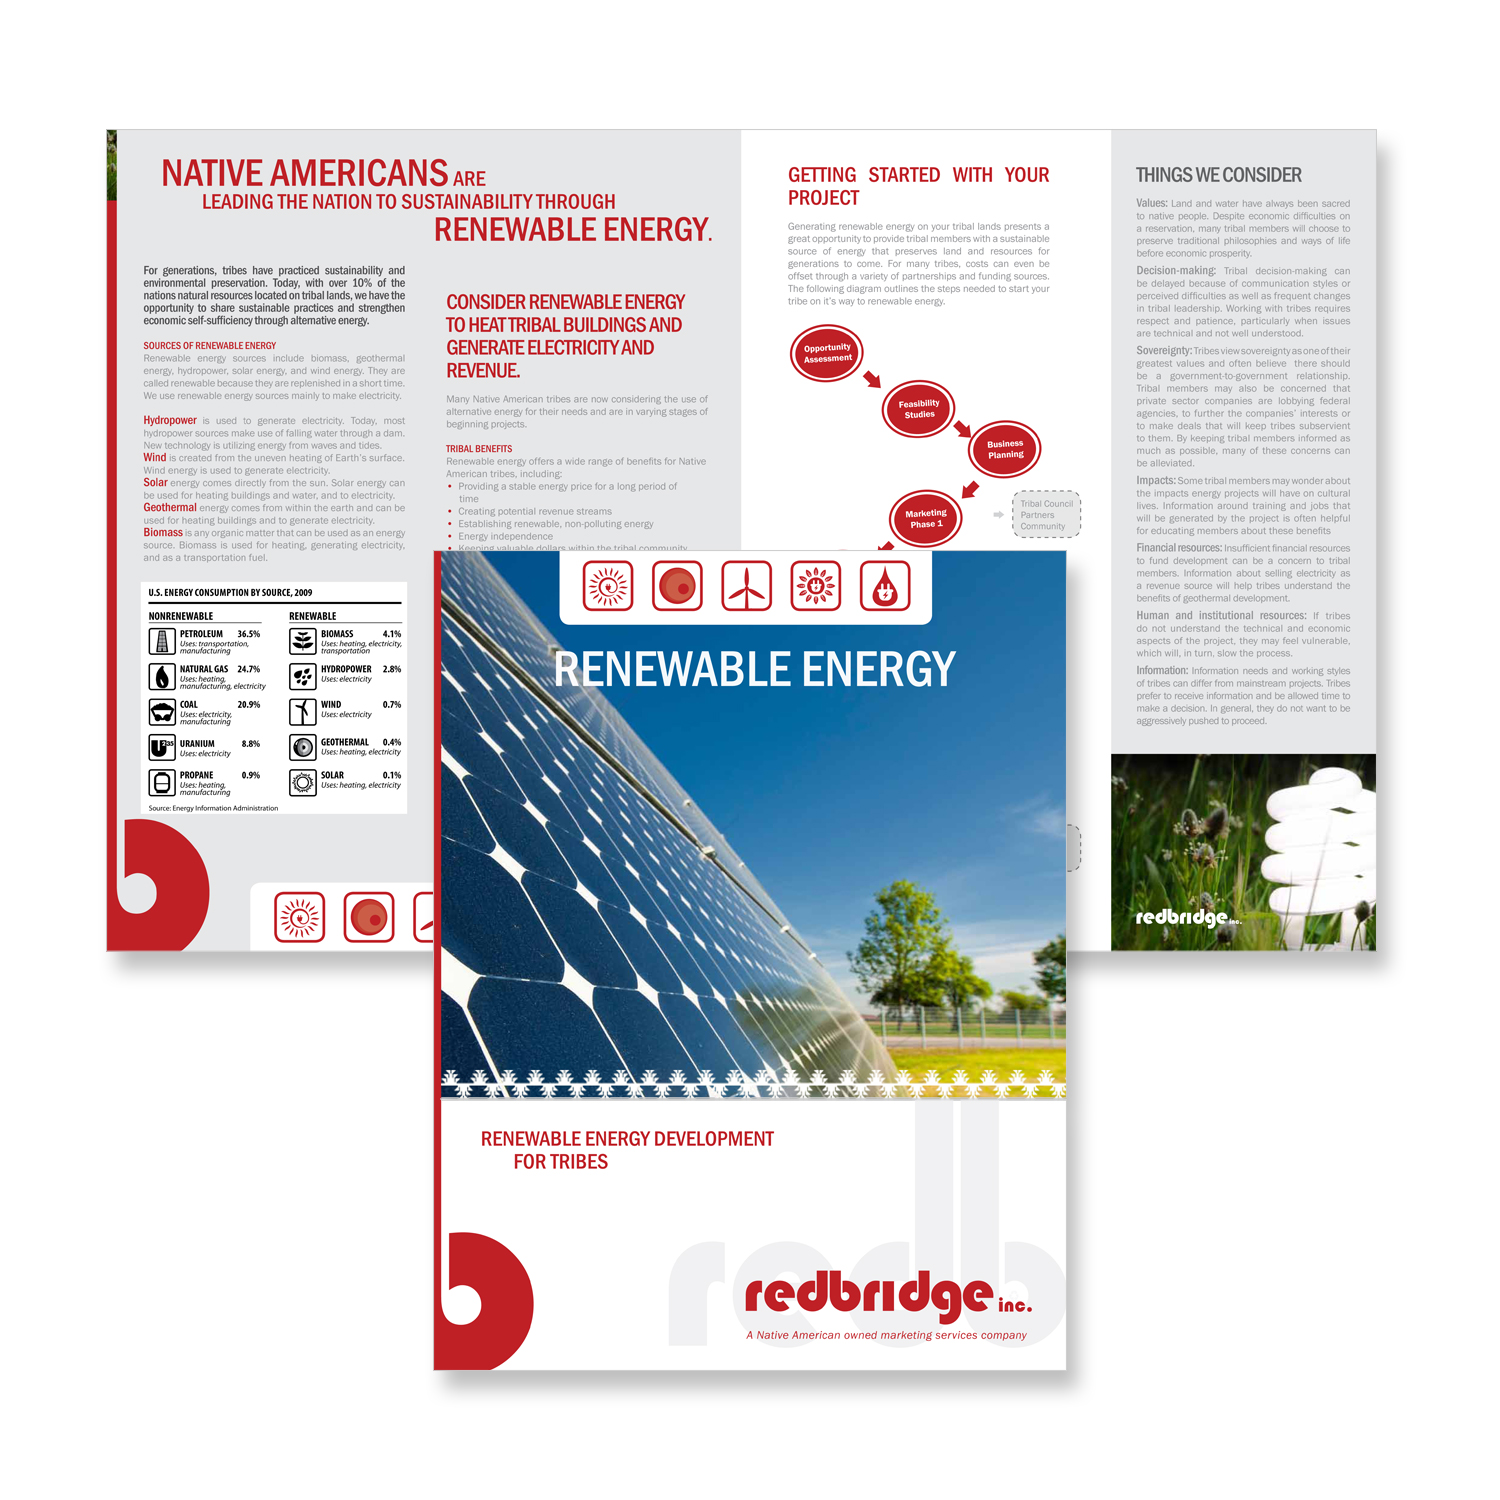 Renewable energy development brochure for stakeholders that are working with tribes. 